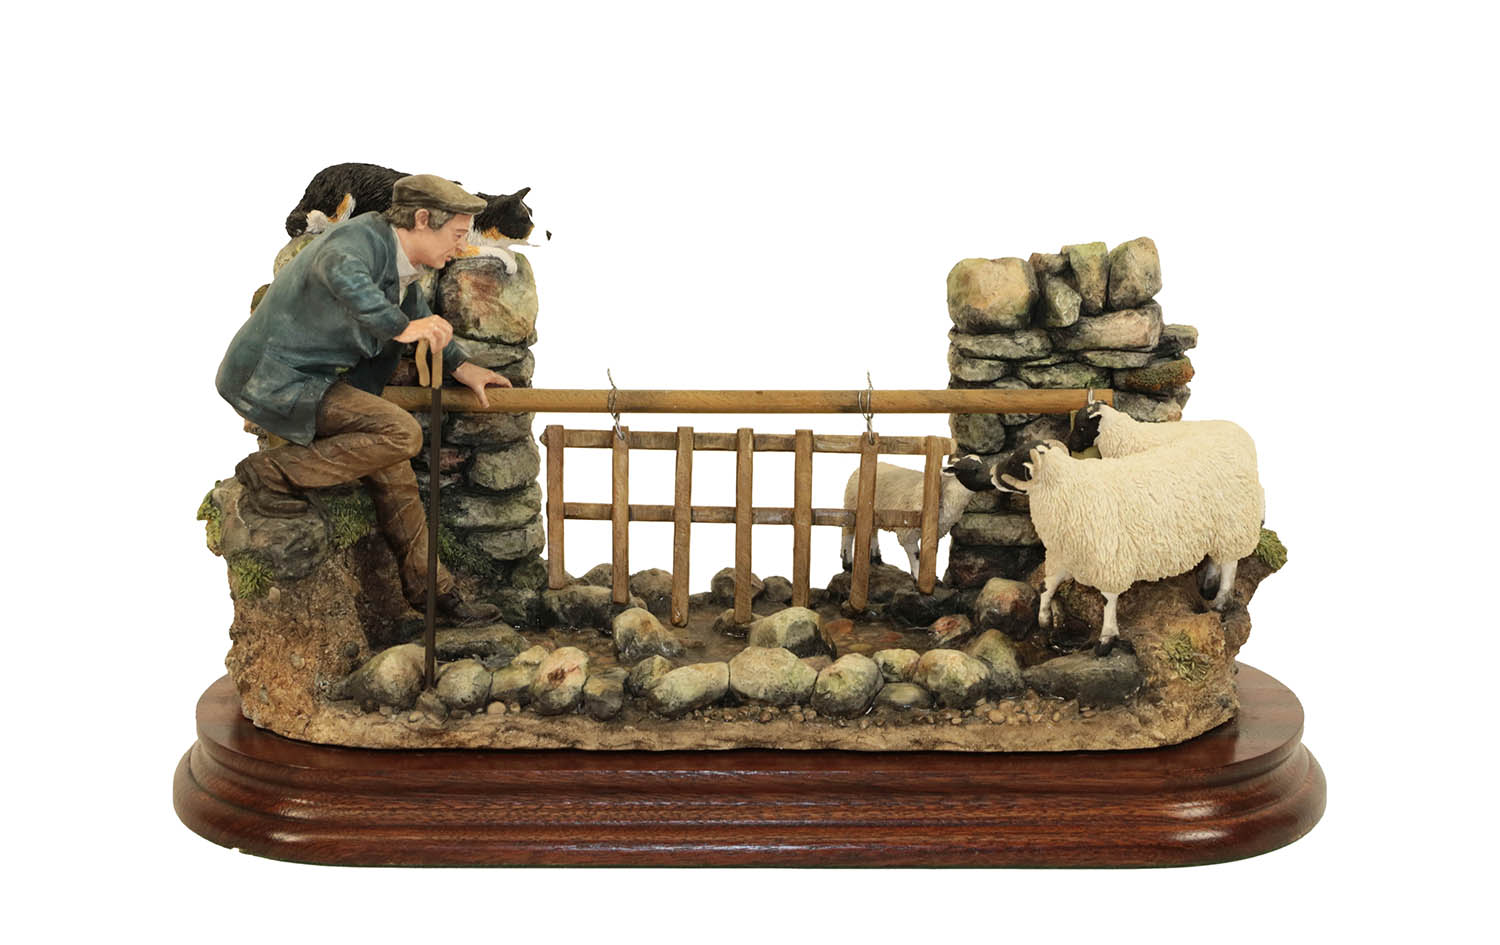 Lot 87 - Border Fine Arts 'To The Rescue', model No. B1100 by Hans Kendrick, limited edition 46/600, on wood